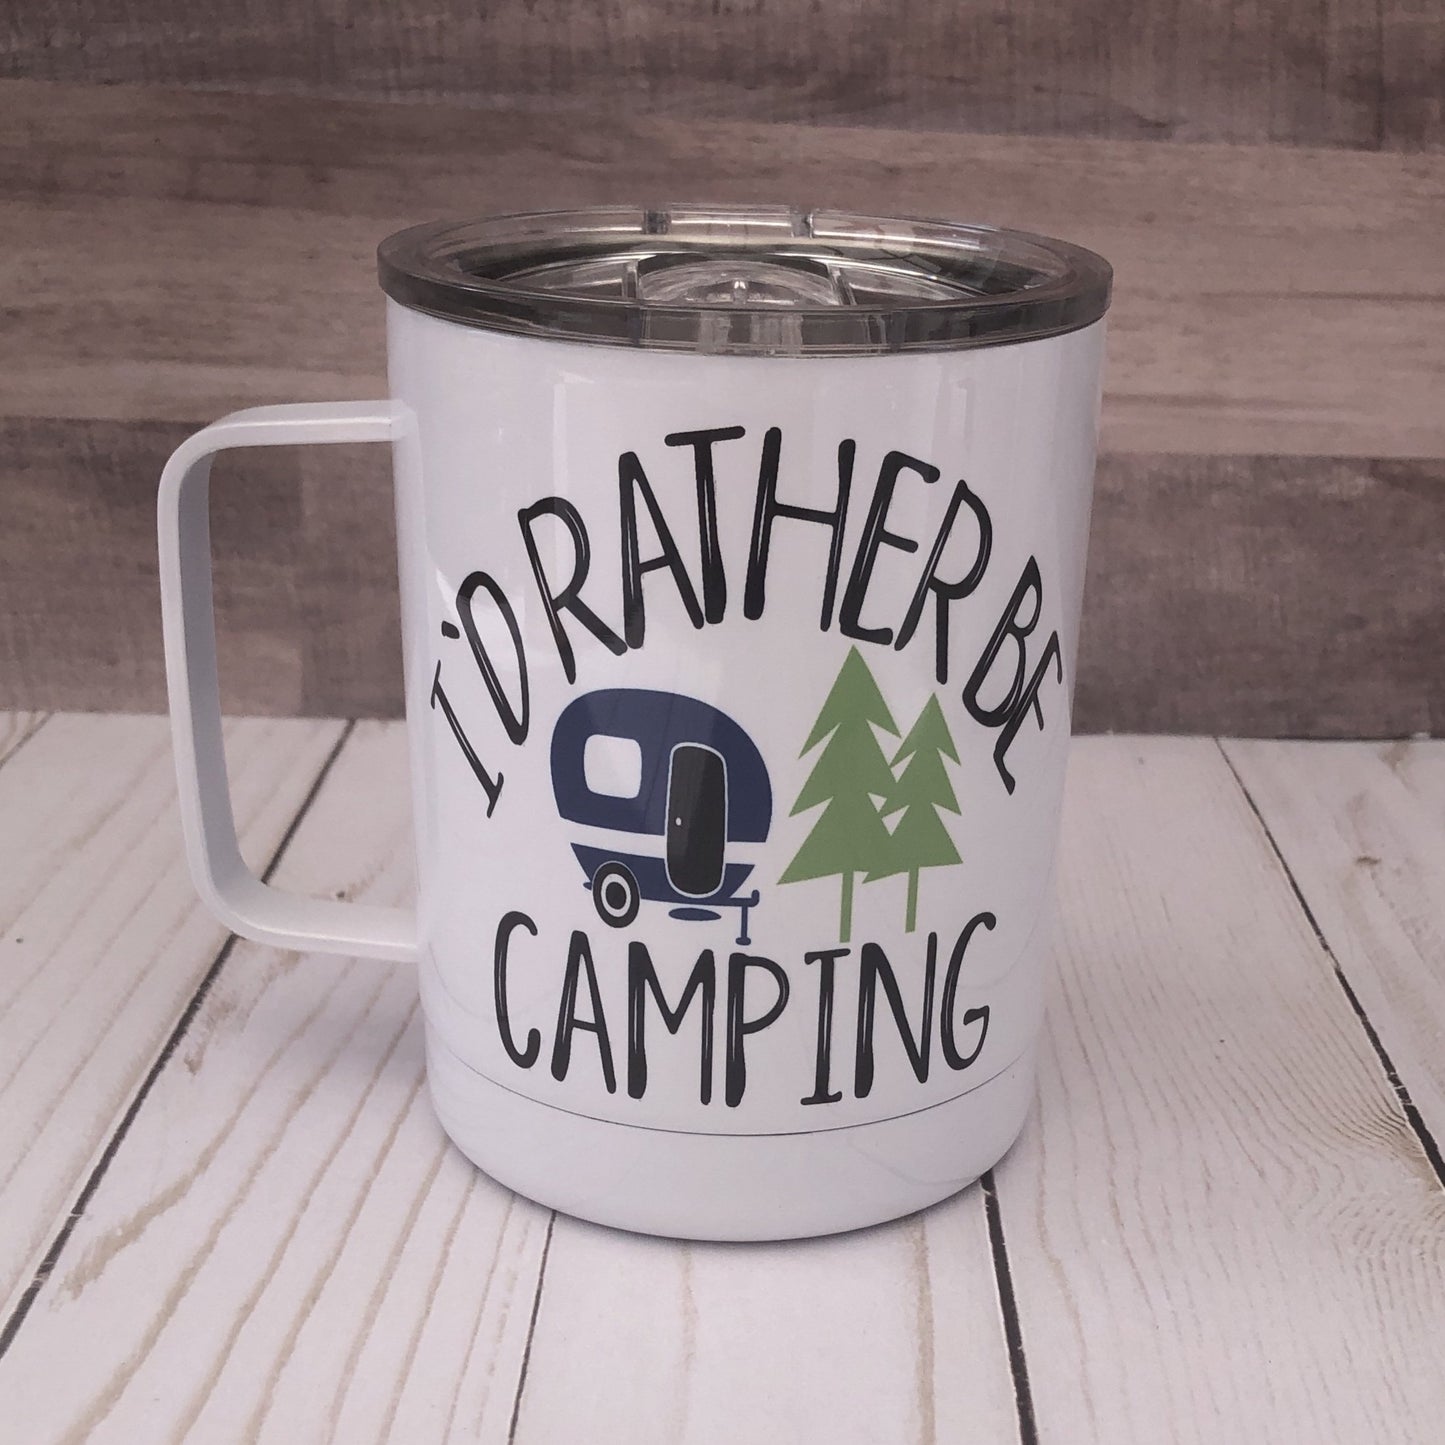 I’d rather be camping